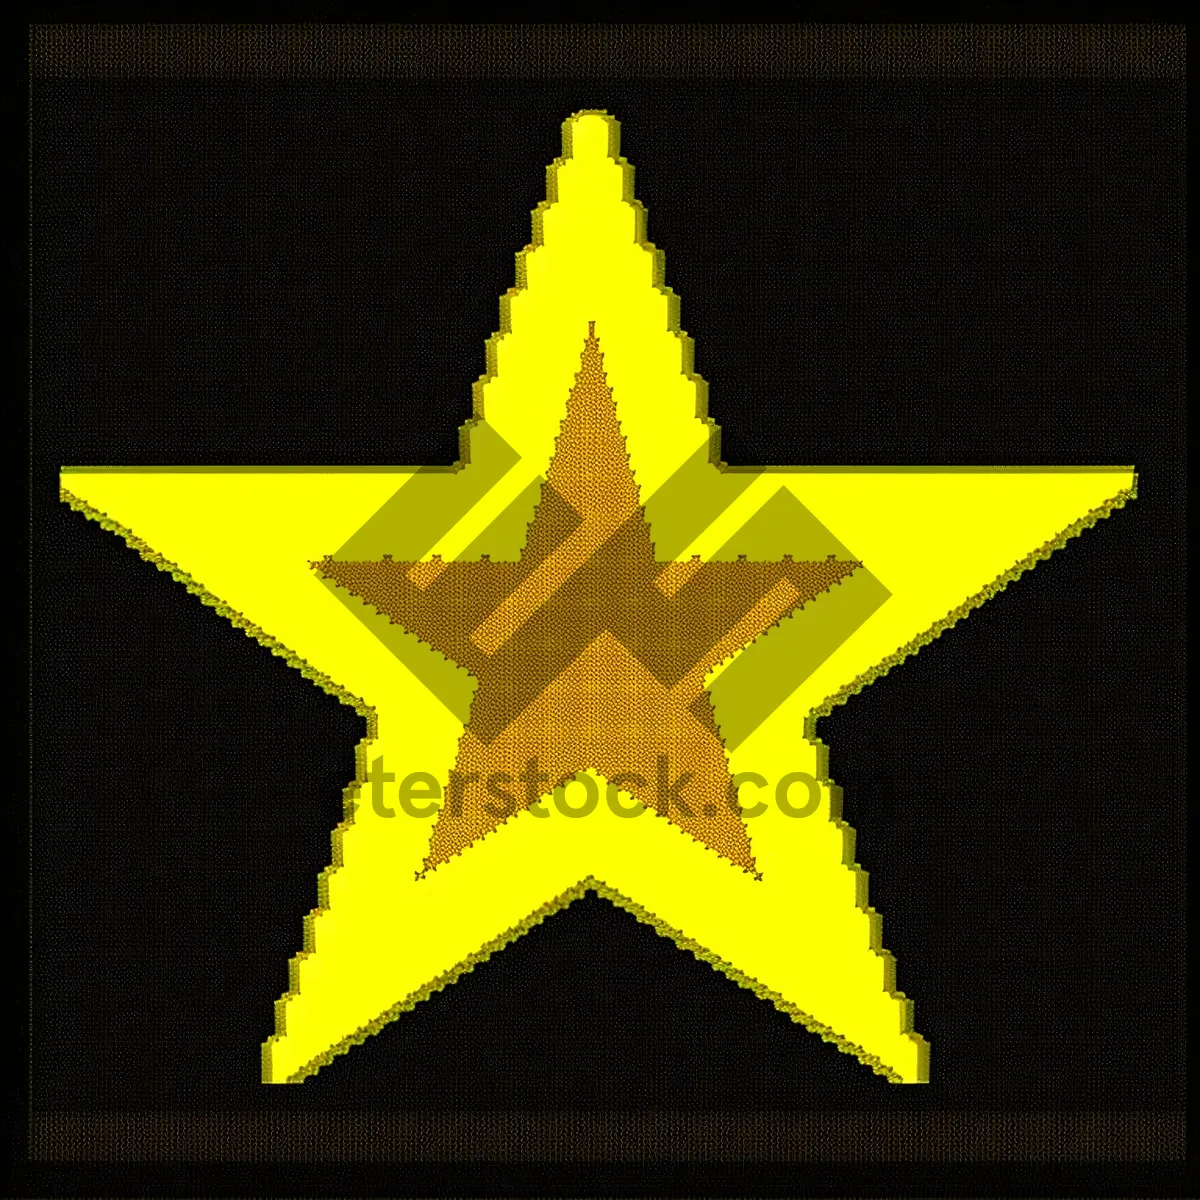 Picture of Caution: Hazard Sign - Baron Yellow Road Safety Icon